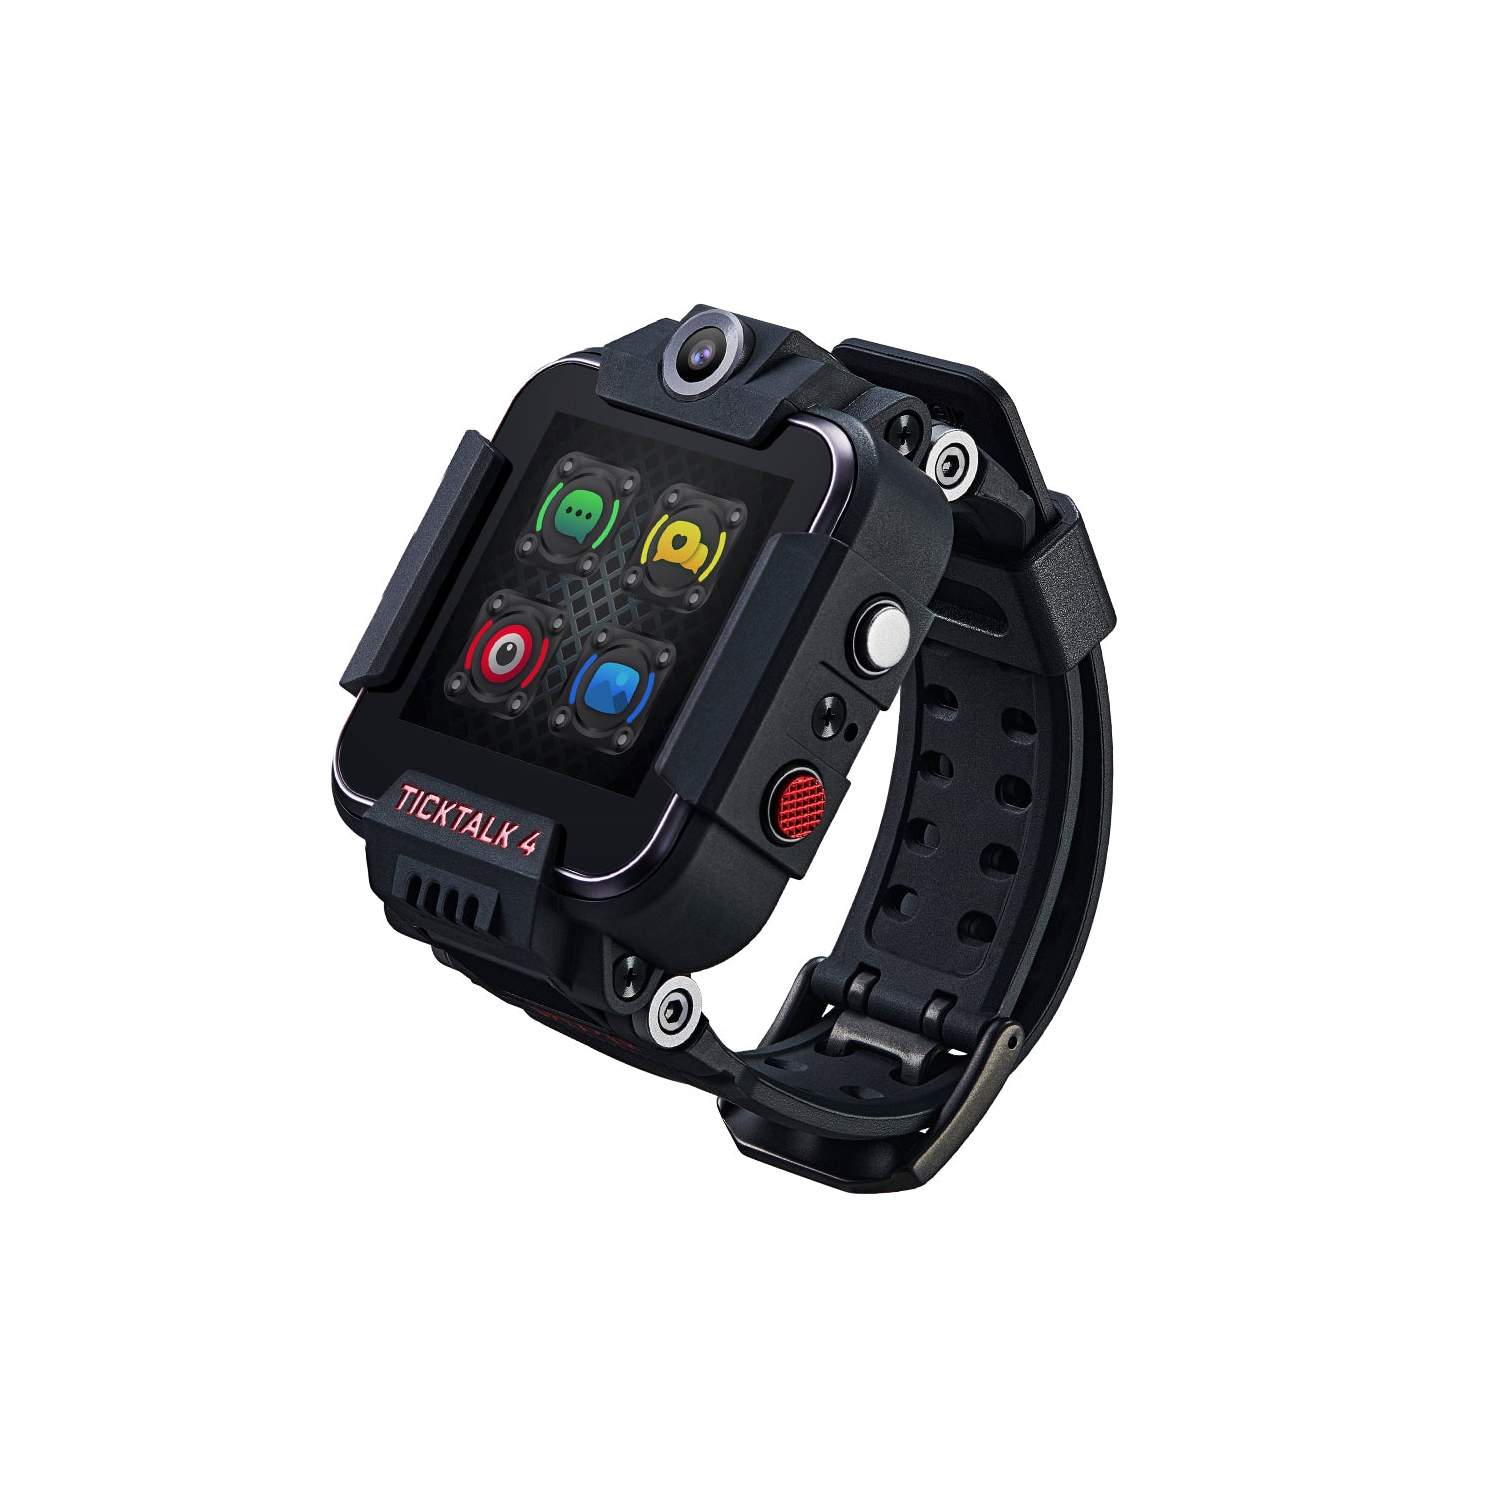 TickTalk 4 Unlocked 4G LTE Kids Smart Watch Phone with GPS Tracker, Combines Video, Voice and Wi-Fi Calling, Messaging & 2x Cameras - Titanium Black (No SIM Included)